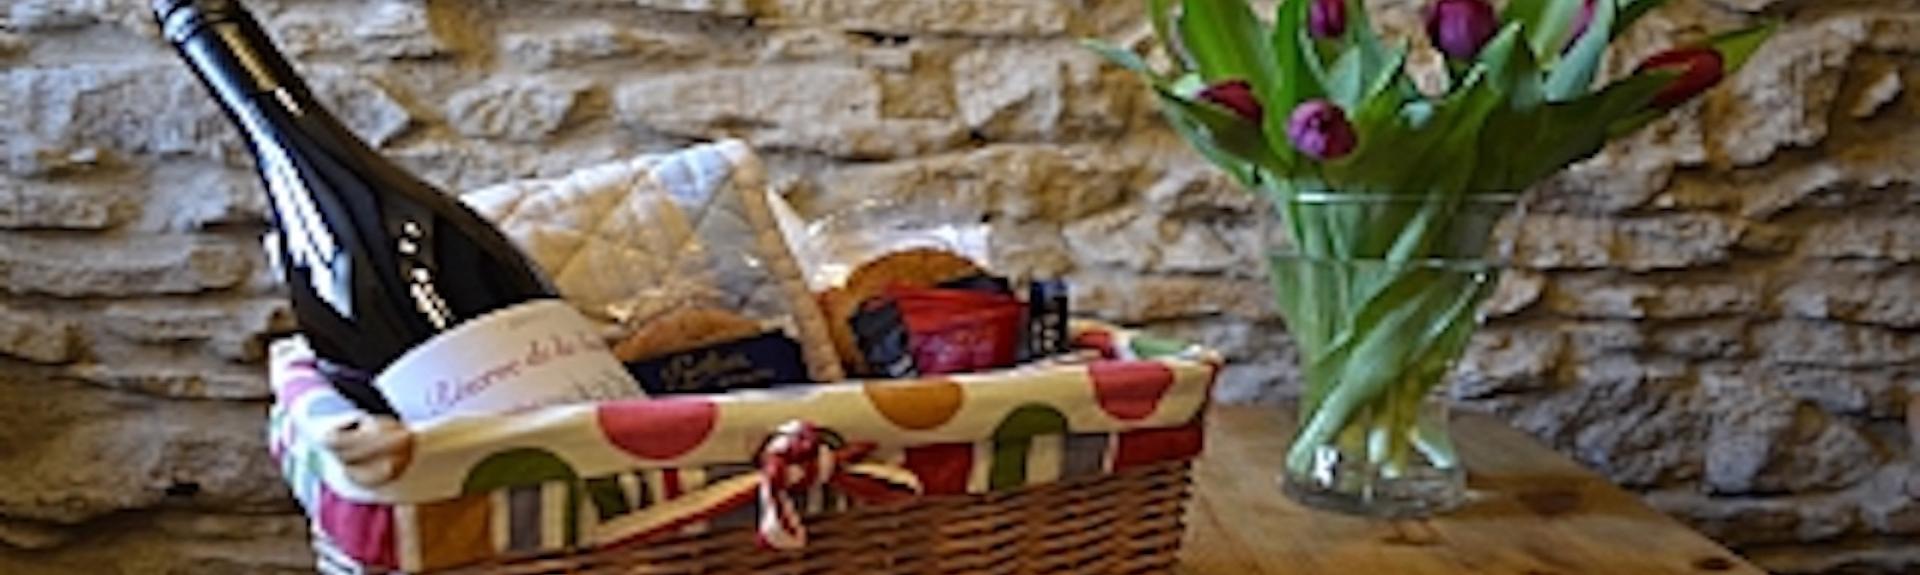 A North Yorkshire holiday cottage welcome basket stocked with goodies - bread, wine, jam, biscuits sits on a table. 